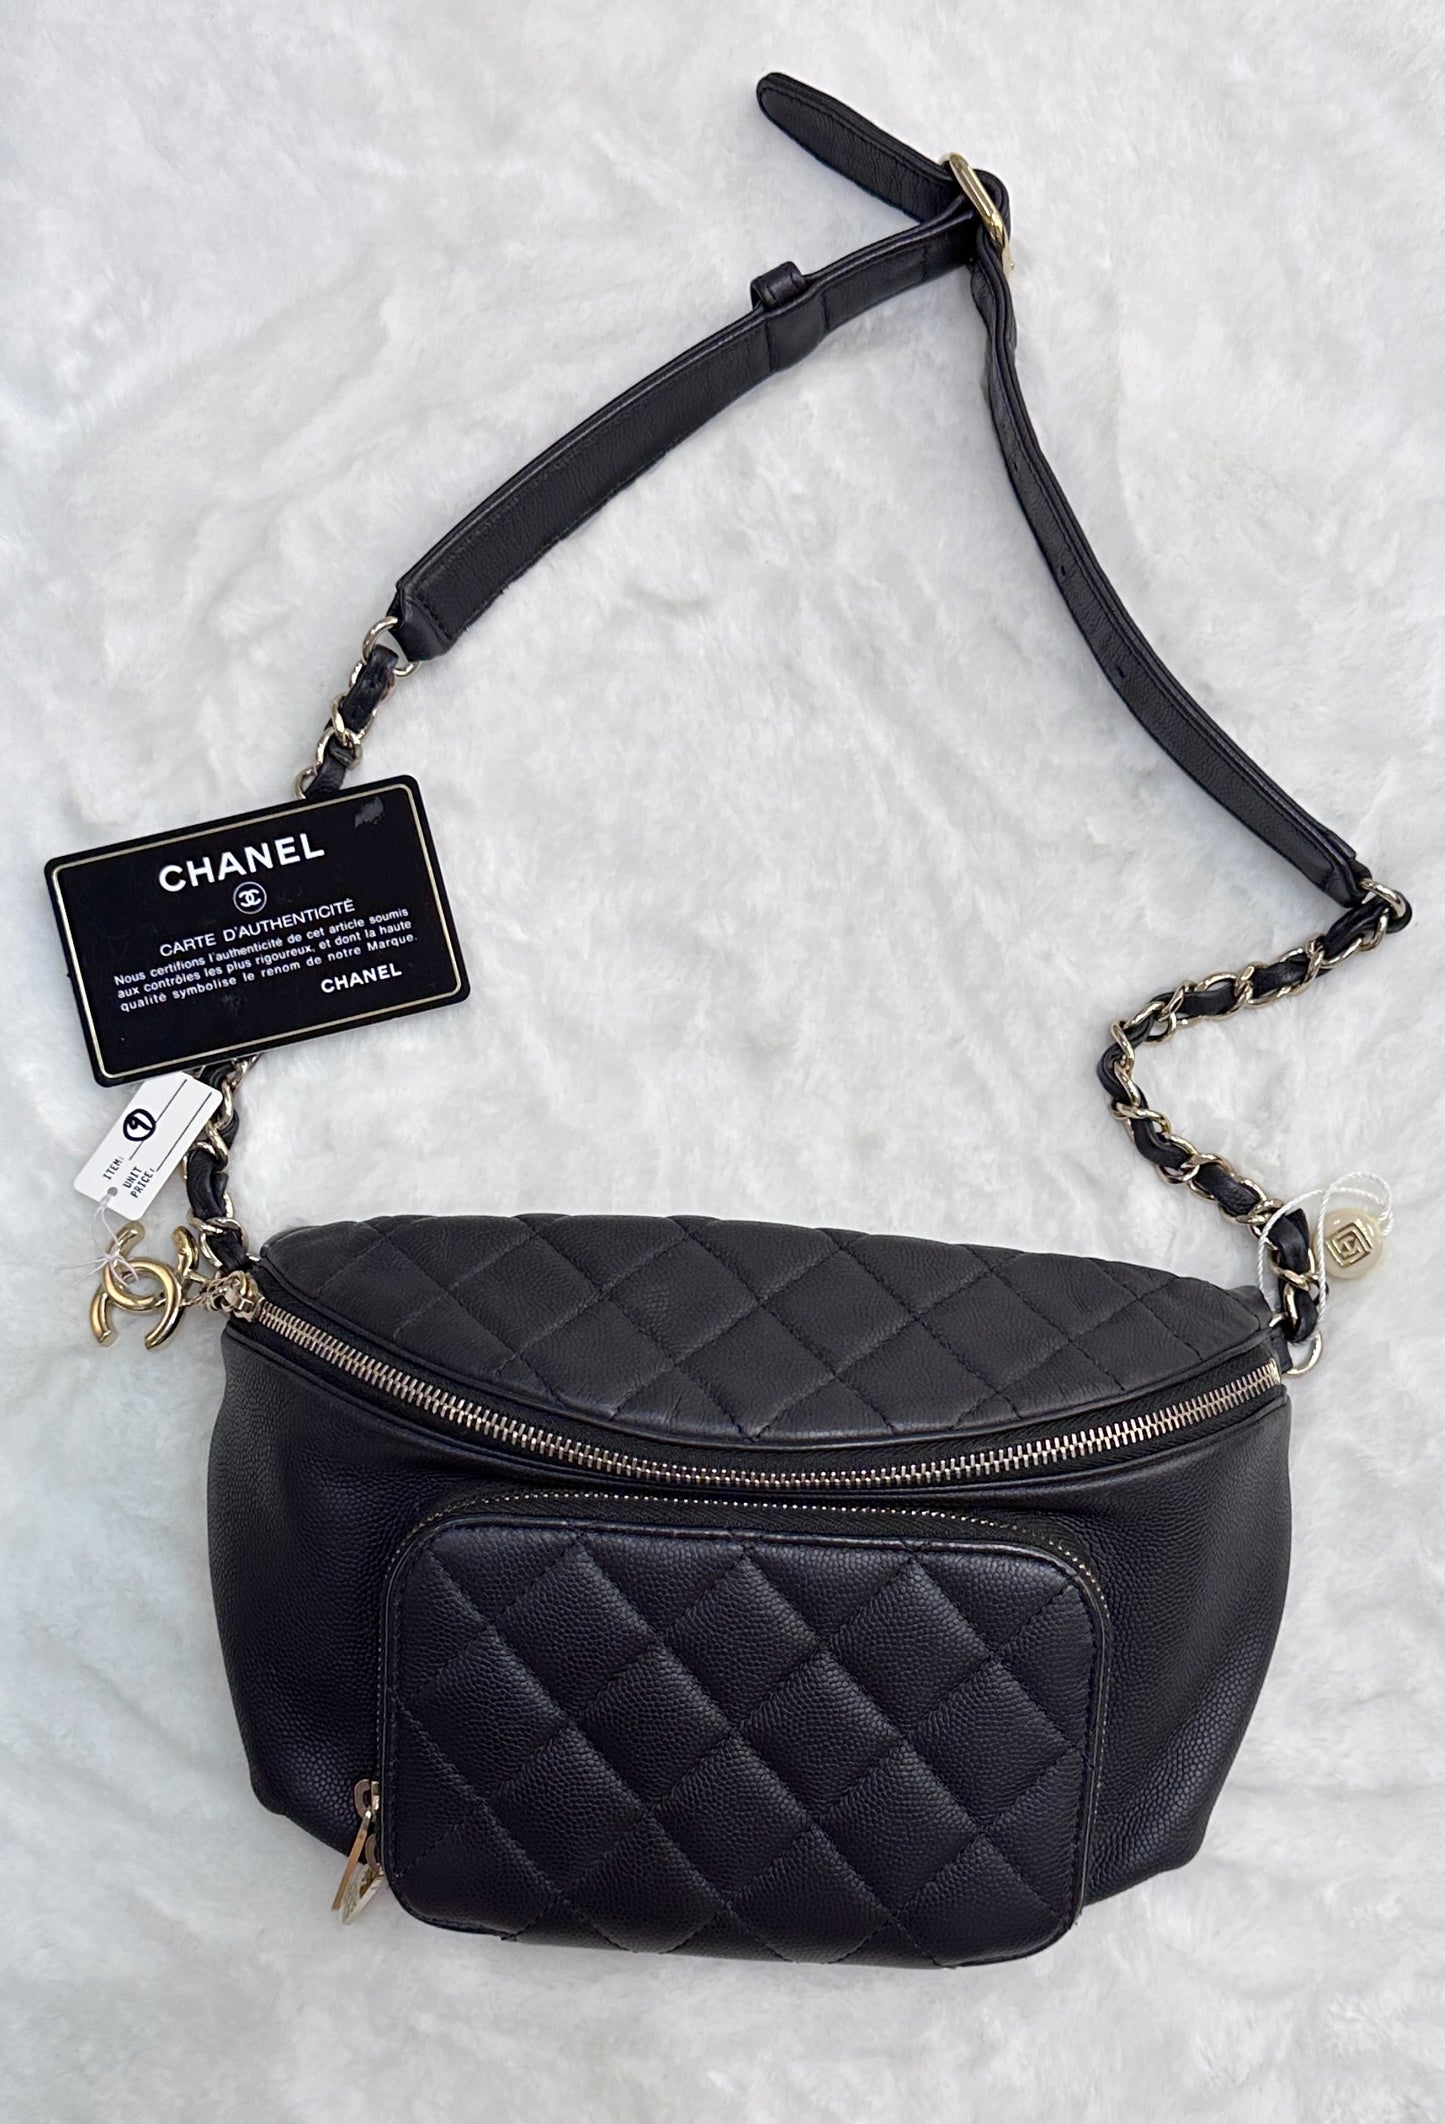 Chanel Black Quilted Caviar Leather Business Affinity Waist Belt Bag